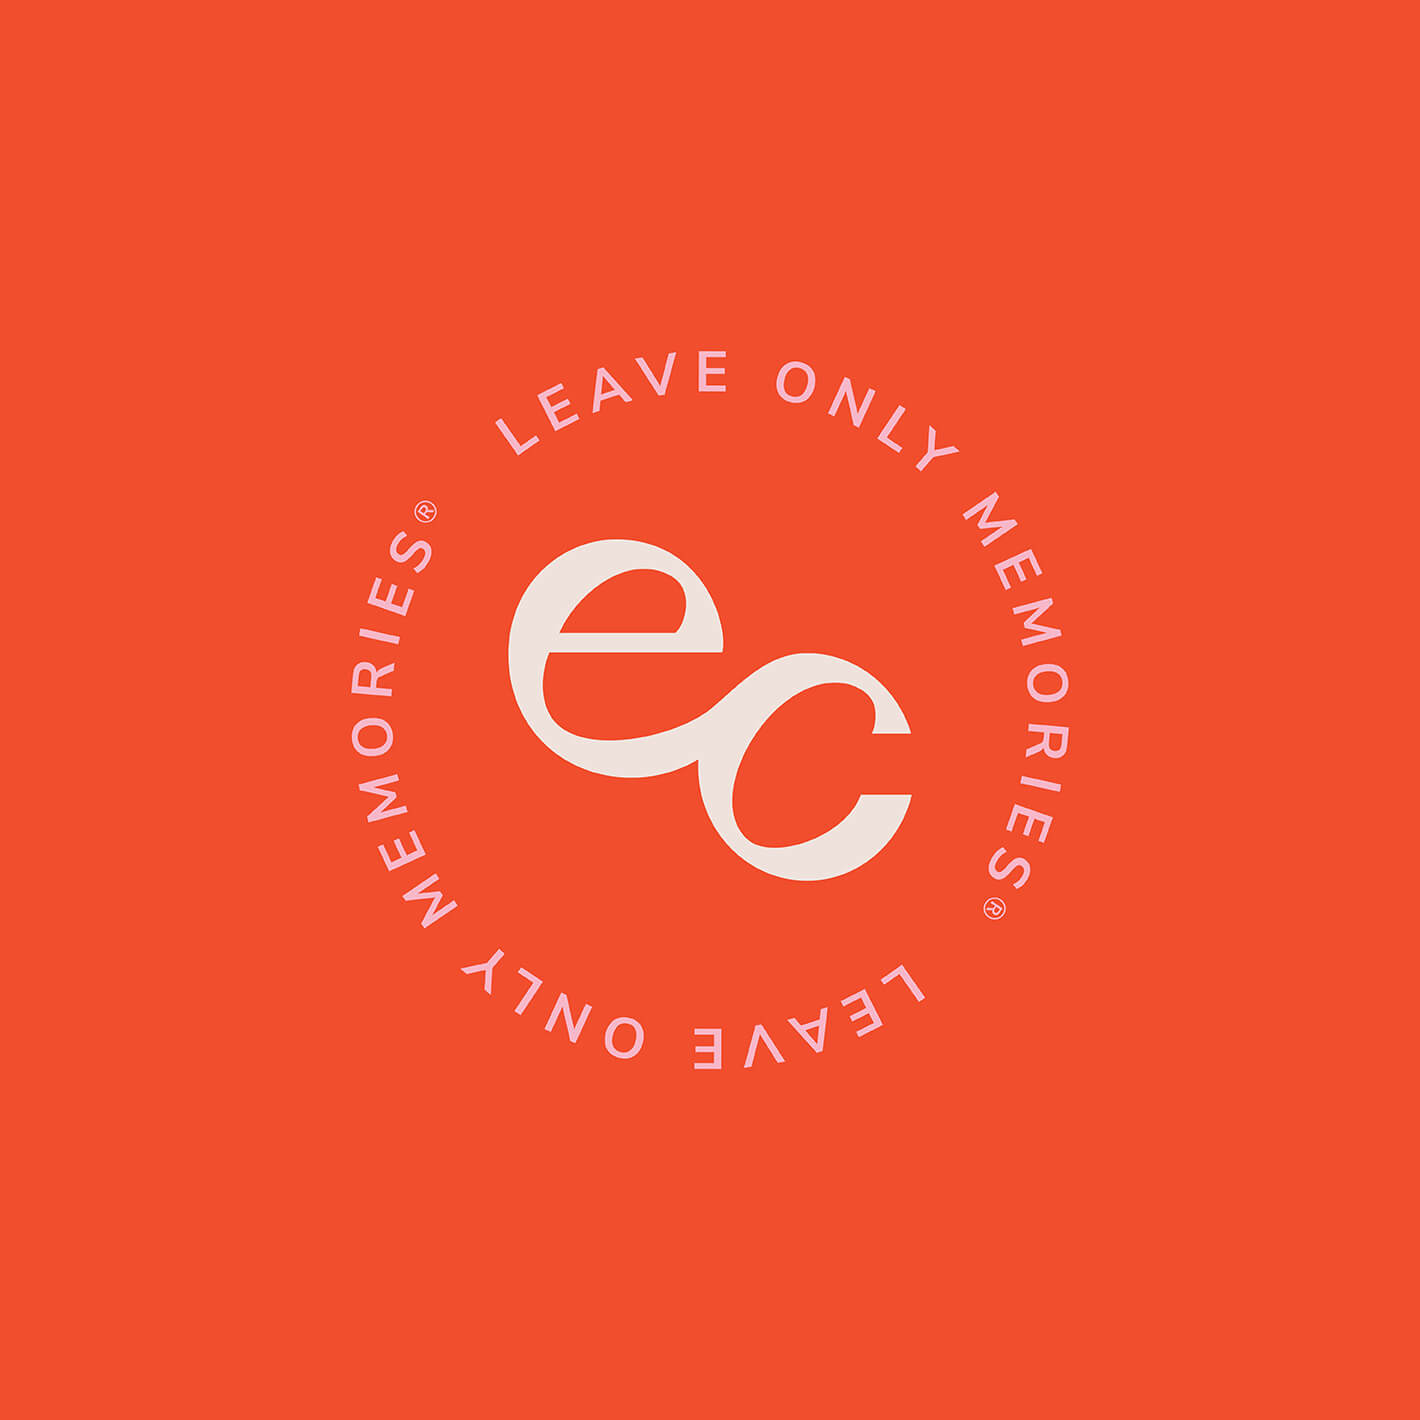 Rebranding case study image of the Eco Confetti brand seal. An interlinked ‘e’ and ‘c’ are surrounded with ‘leave only memories’ arranged in a circle on a bright orange background.